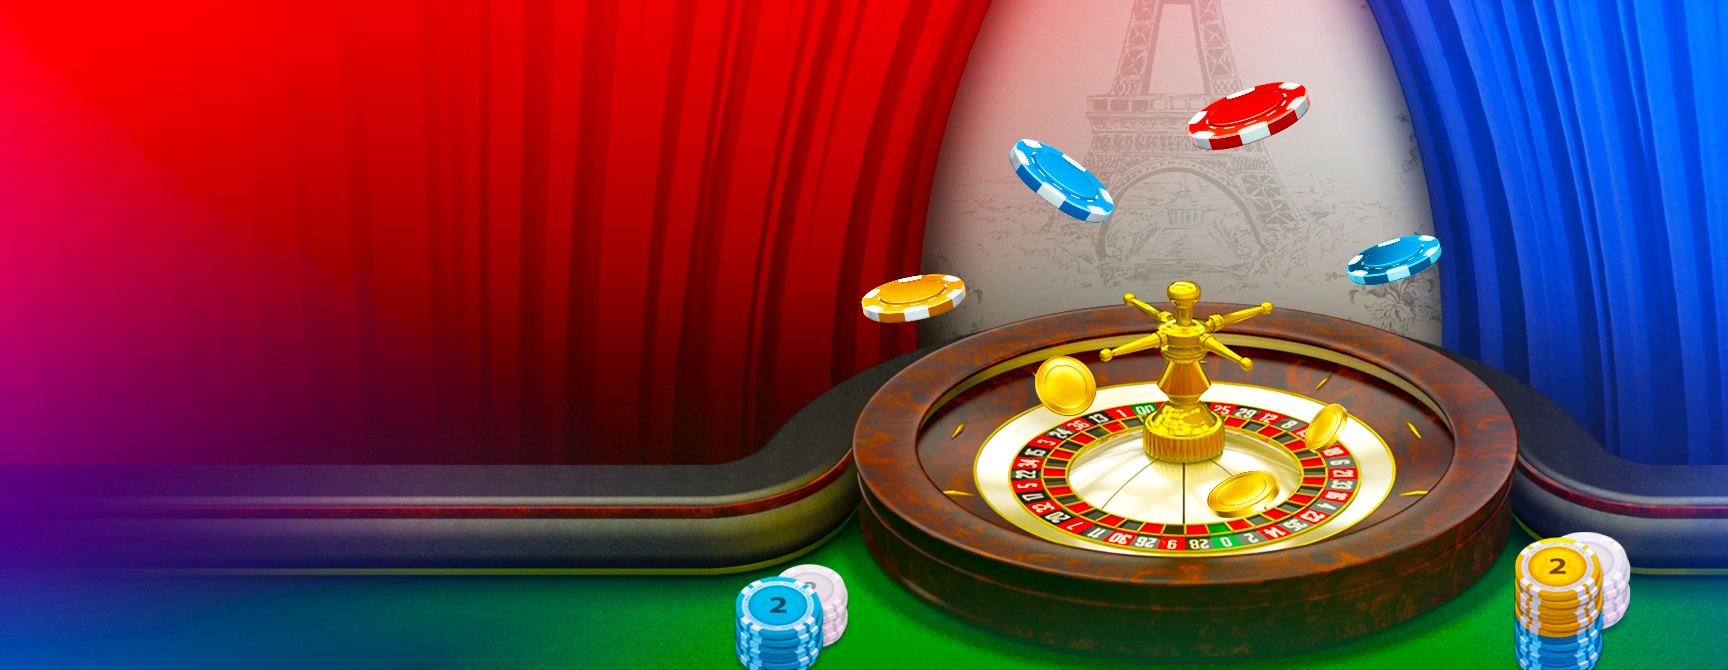 Choosing Your Lucky Number: A Guide to Playing the Roulette Game in USA